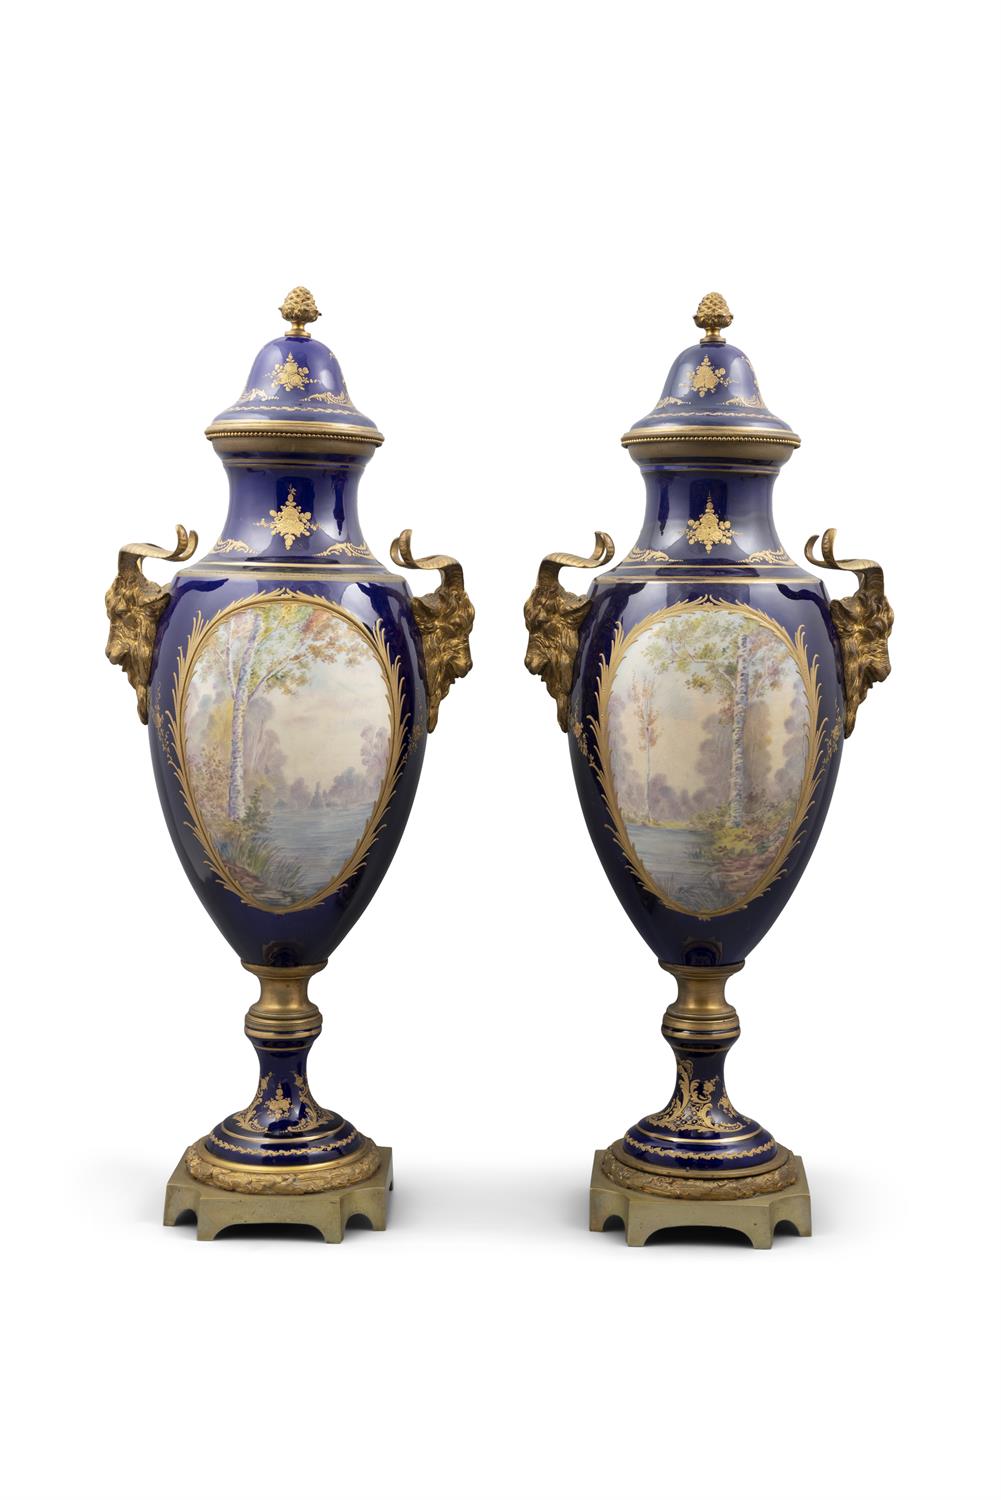 A PAIR OF 19TH CENTURY 'SEVRES STYLE' PORCELAIN VASES AND COVERS, one signed 'C. - Image 3 of 5